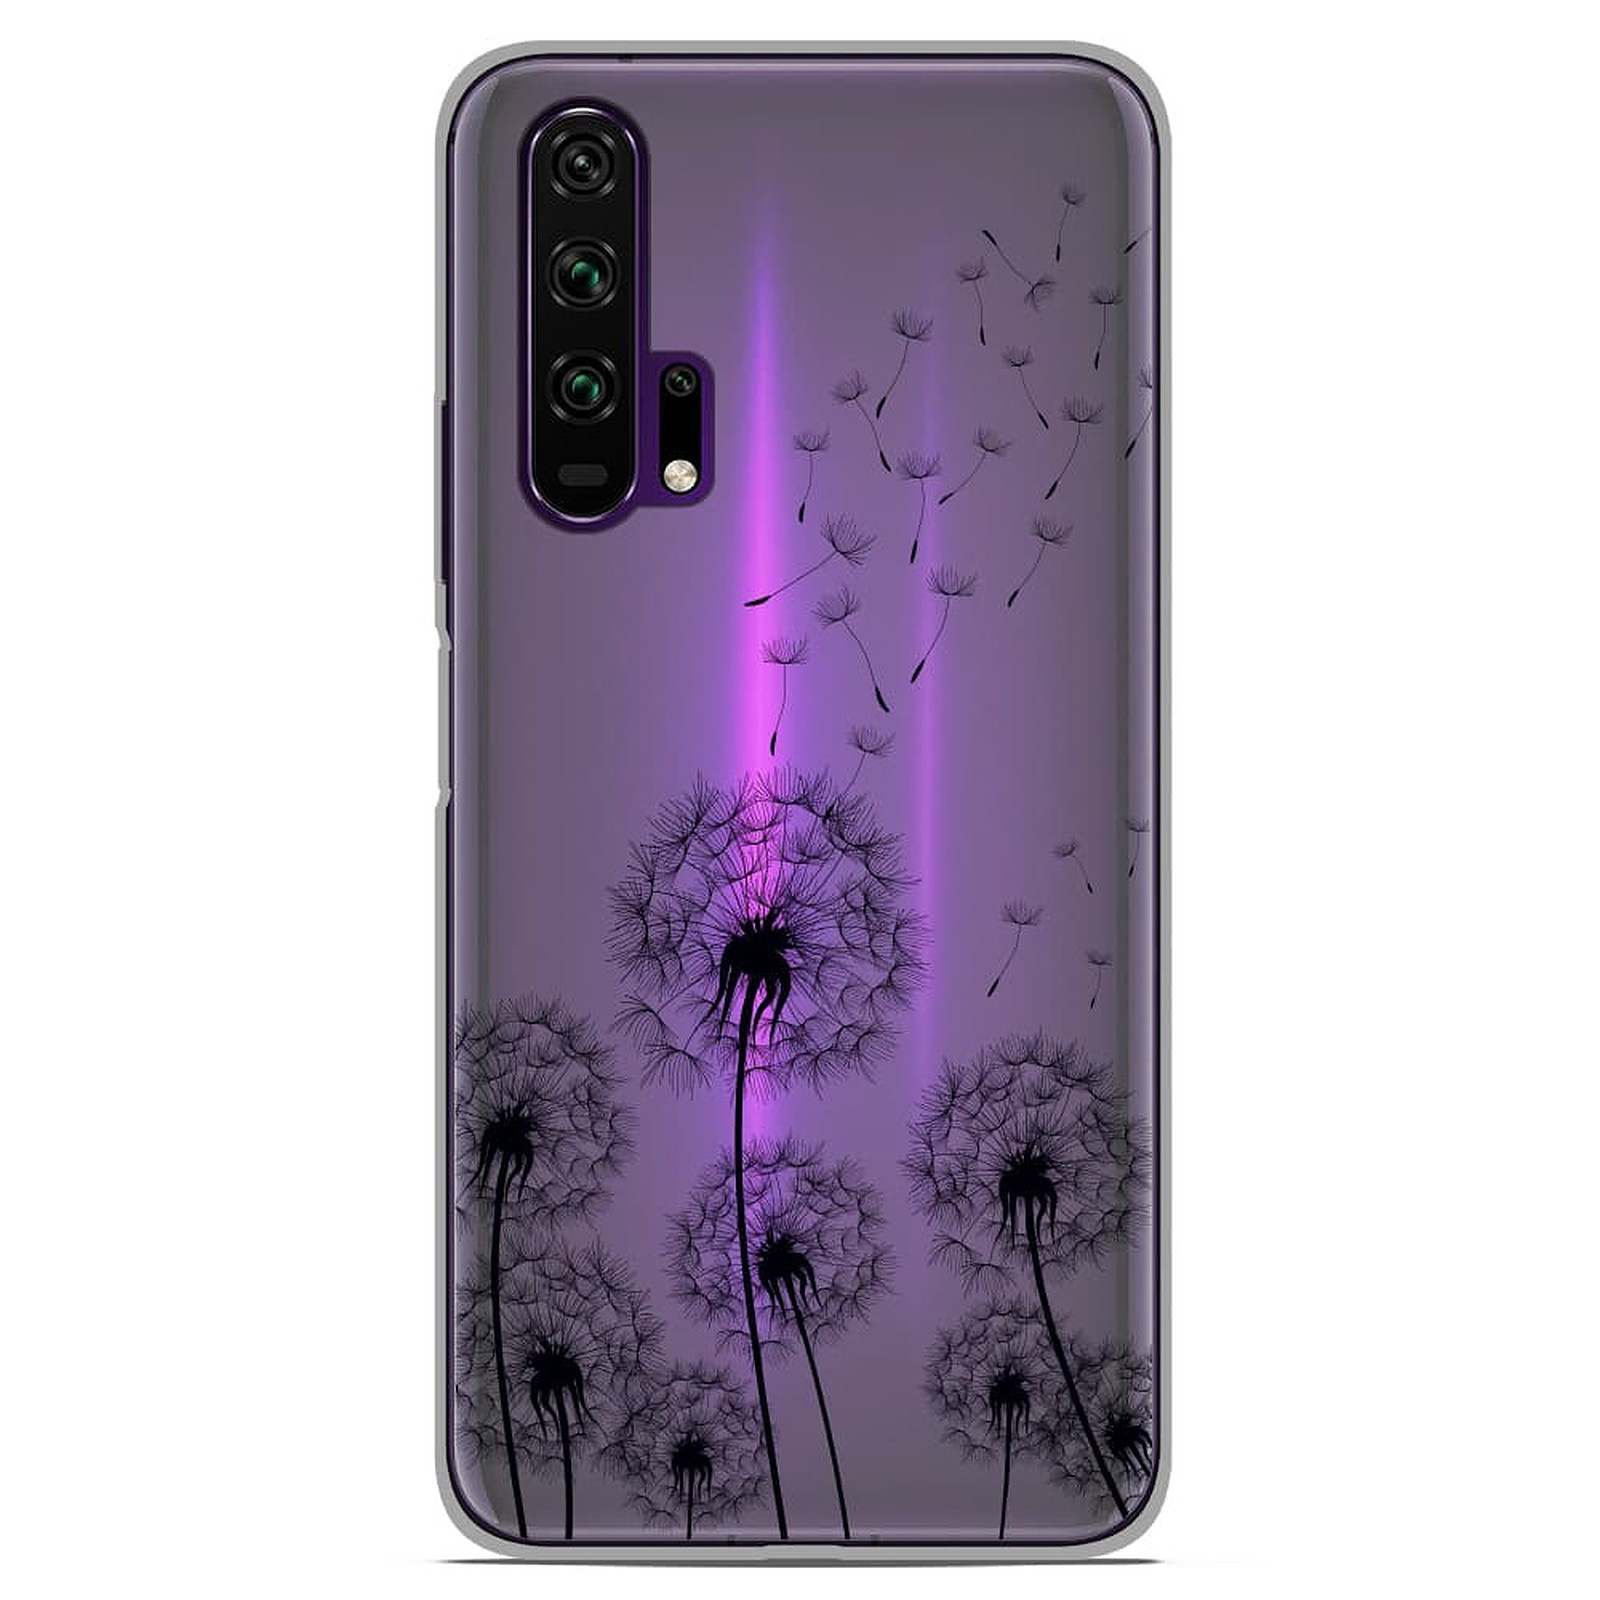 1001 Coques Coque silicone gel Huawei Honor 20 Pro motif Pissenlits Noir - Coque telephone 1001Coques